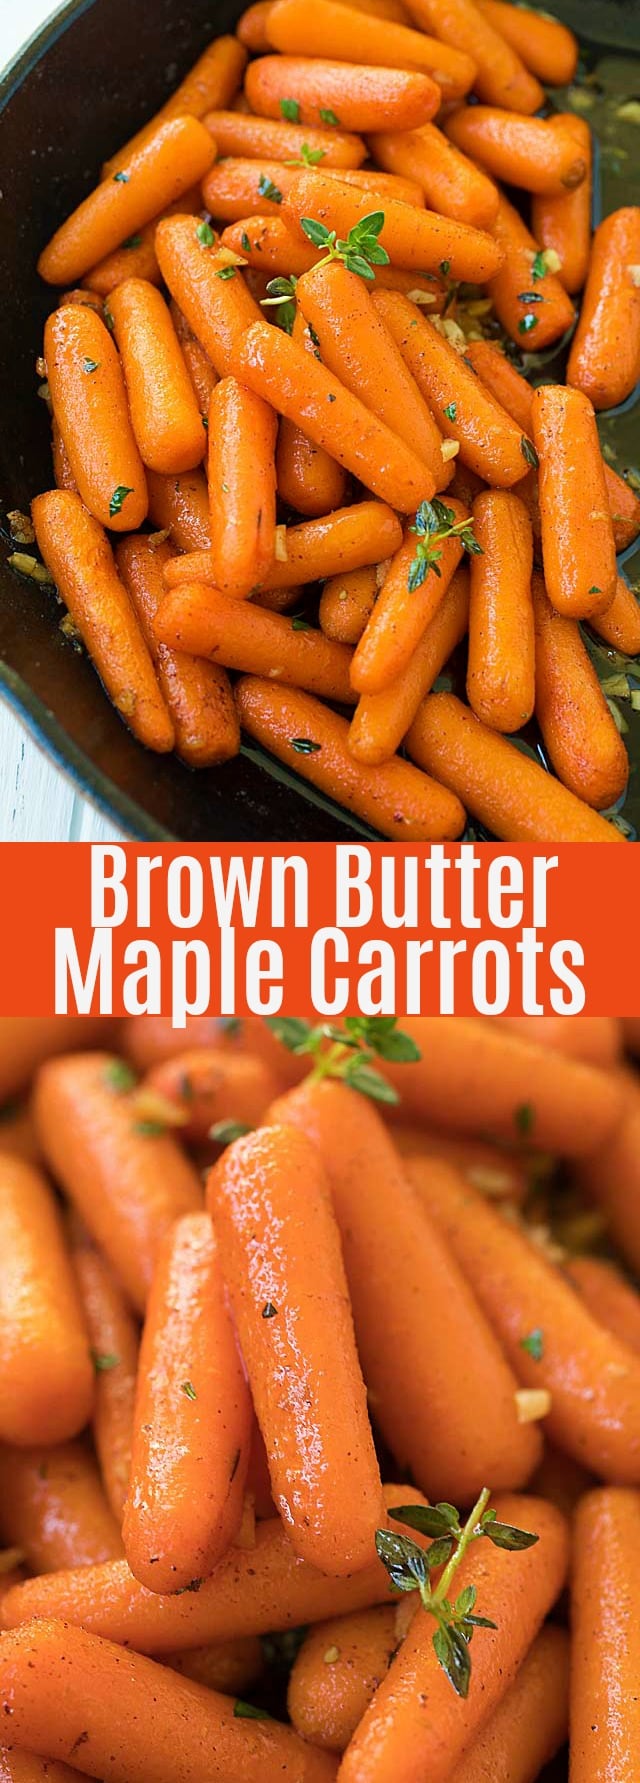 Brown Butter Maple Roasted Carrots - tender, sweet and perfectly roasted carrots with maple syrup, brown butter and garlic herb. Takes only 10 mins active time. So good!